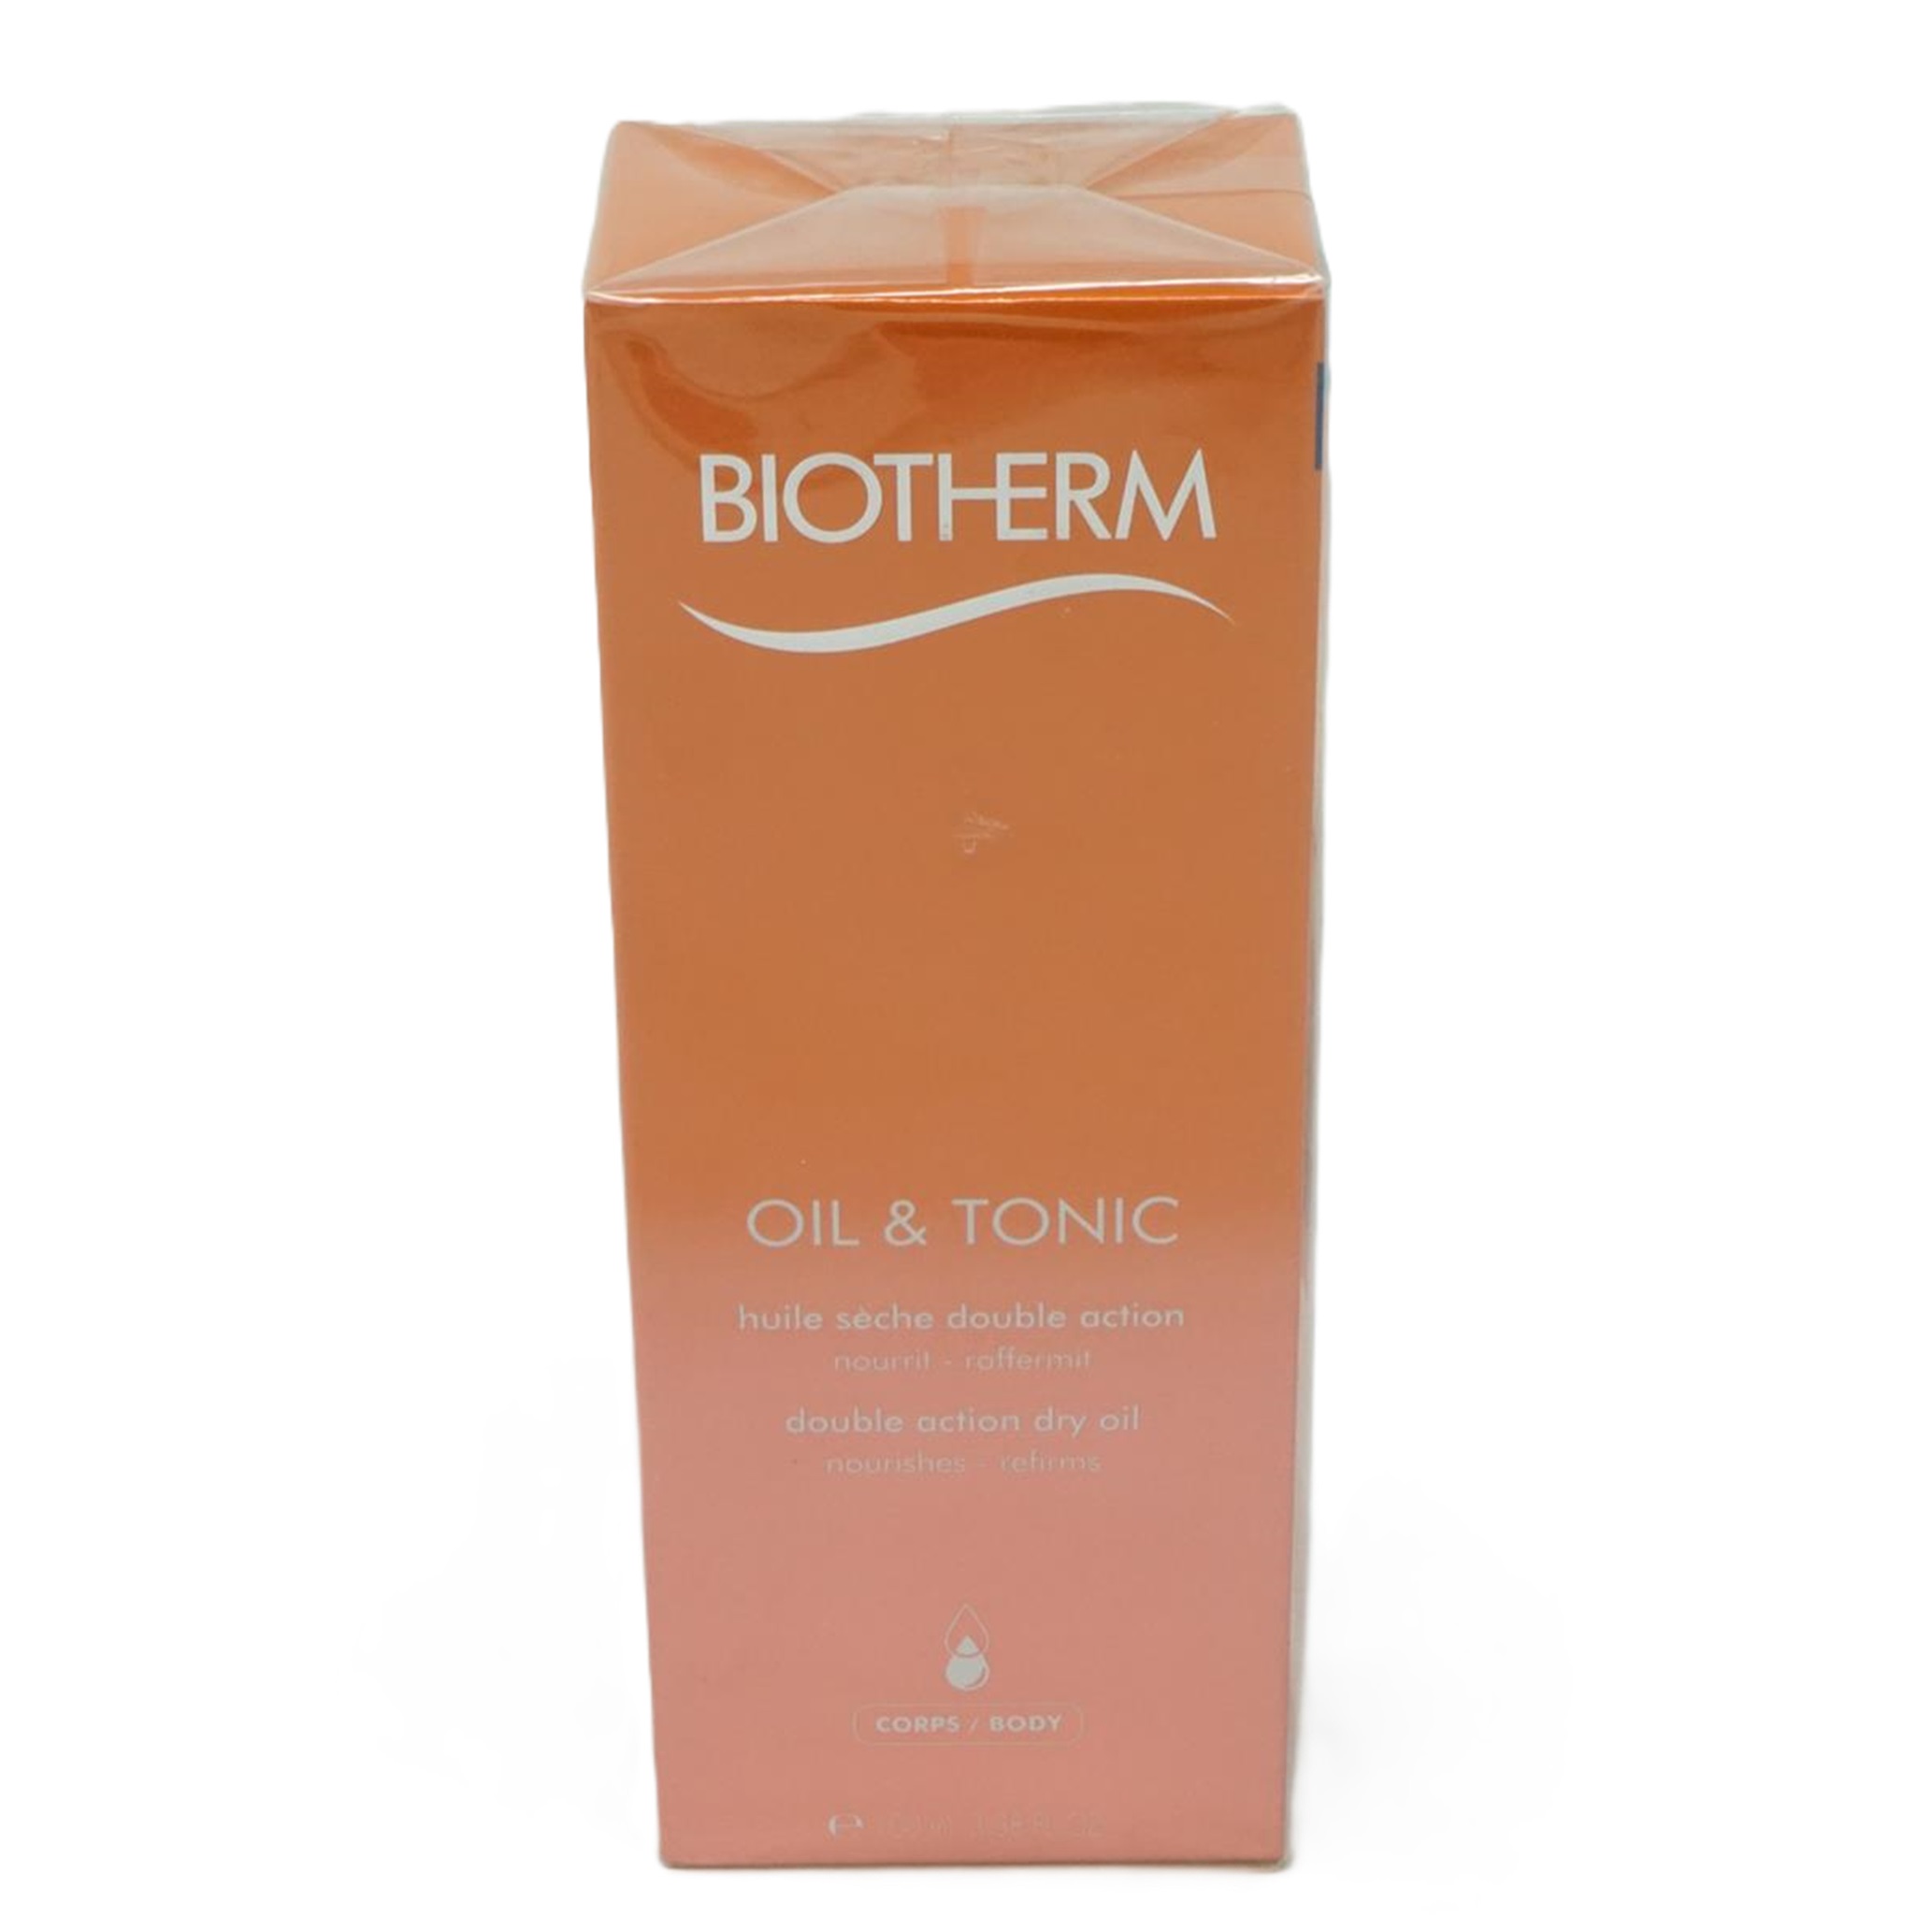 Biotherm Oil &Tonic Huile seche double action dry Oil Body 100ml